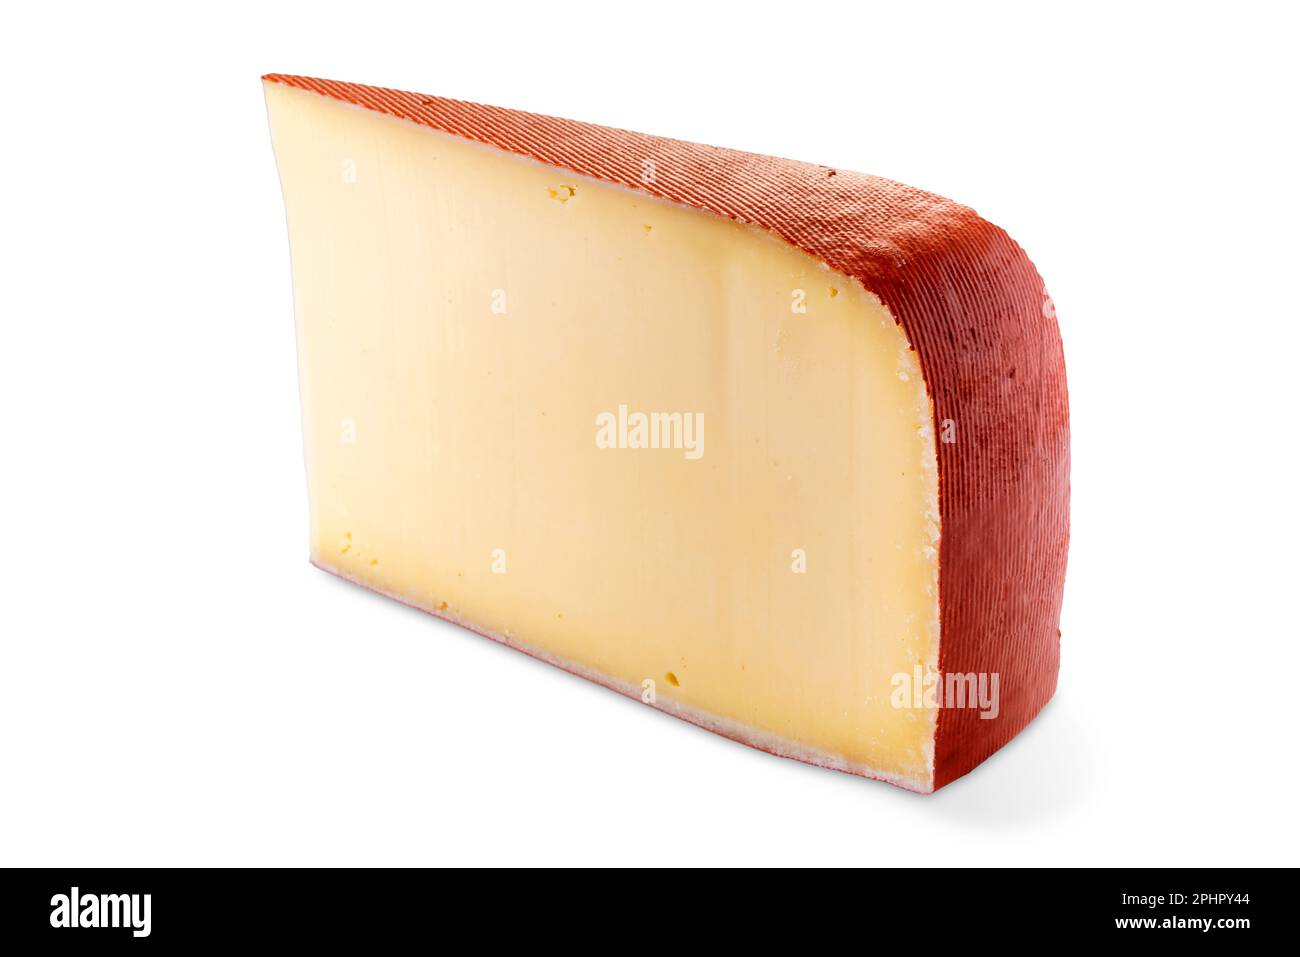 Fontal fontina cheese slice isolated on white with clipping path included. Stock Photo